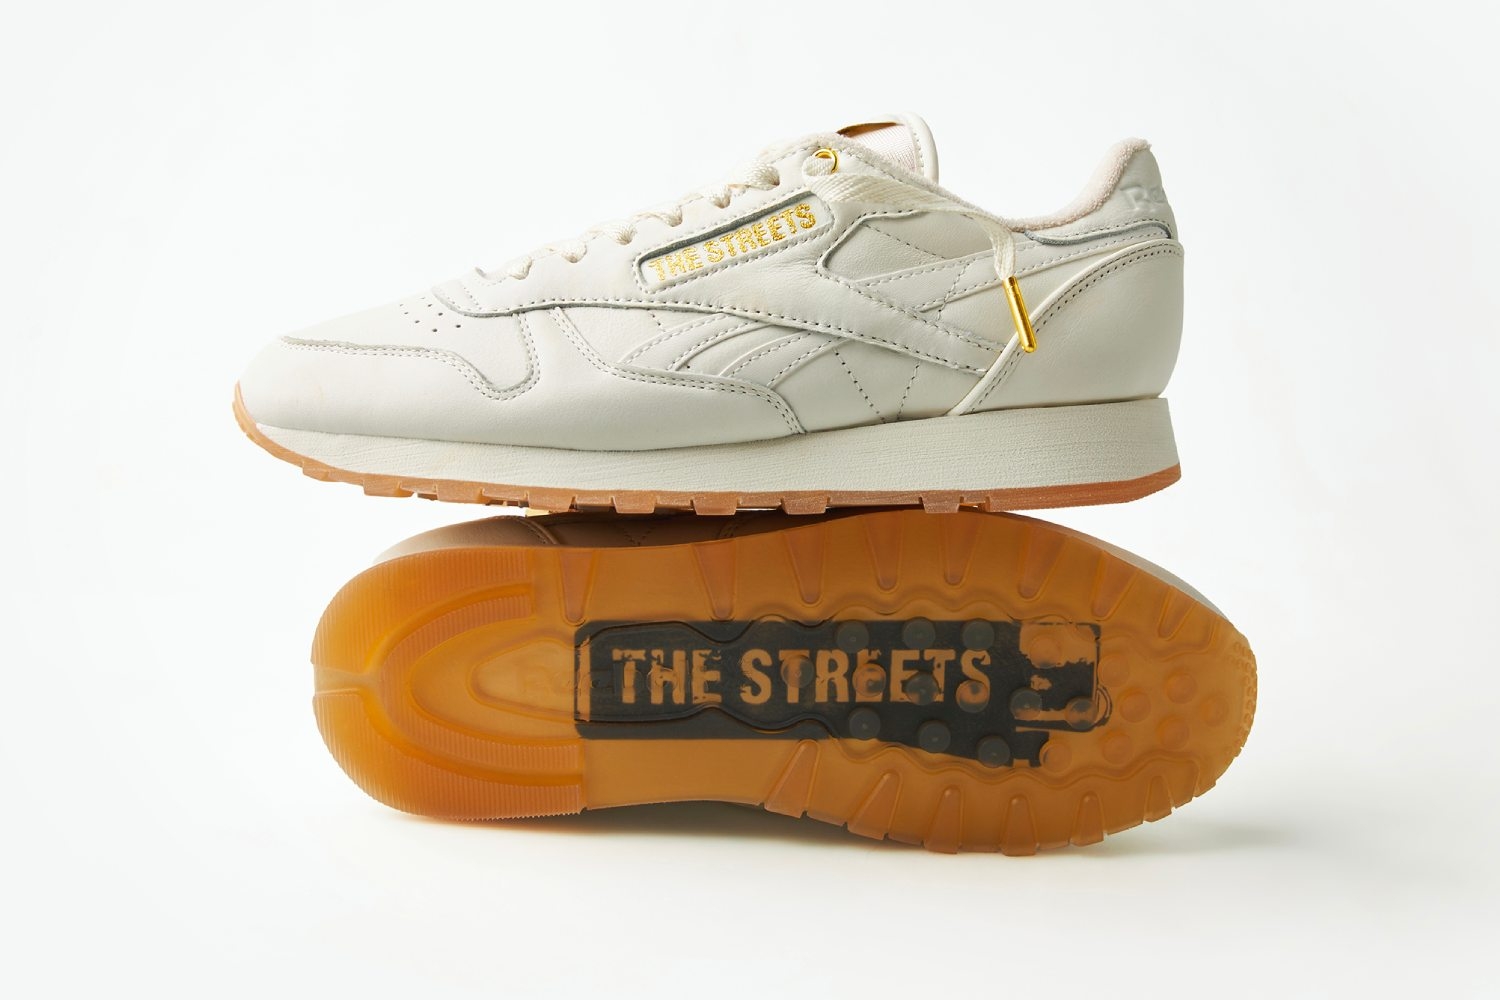 END. onthult het Reebok x The Streets Classic Leather pack